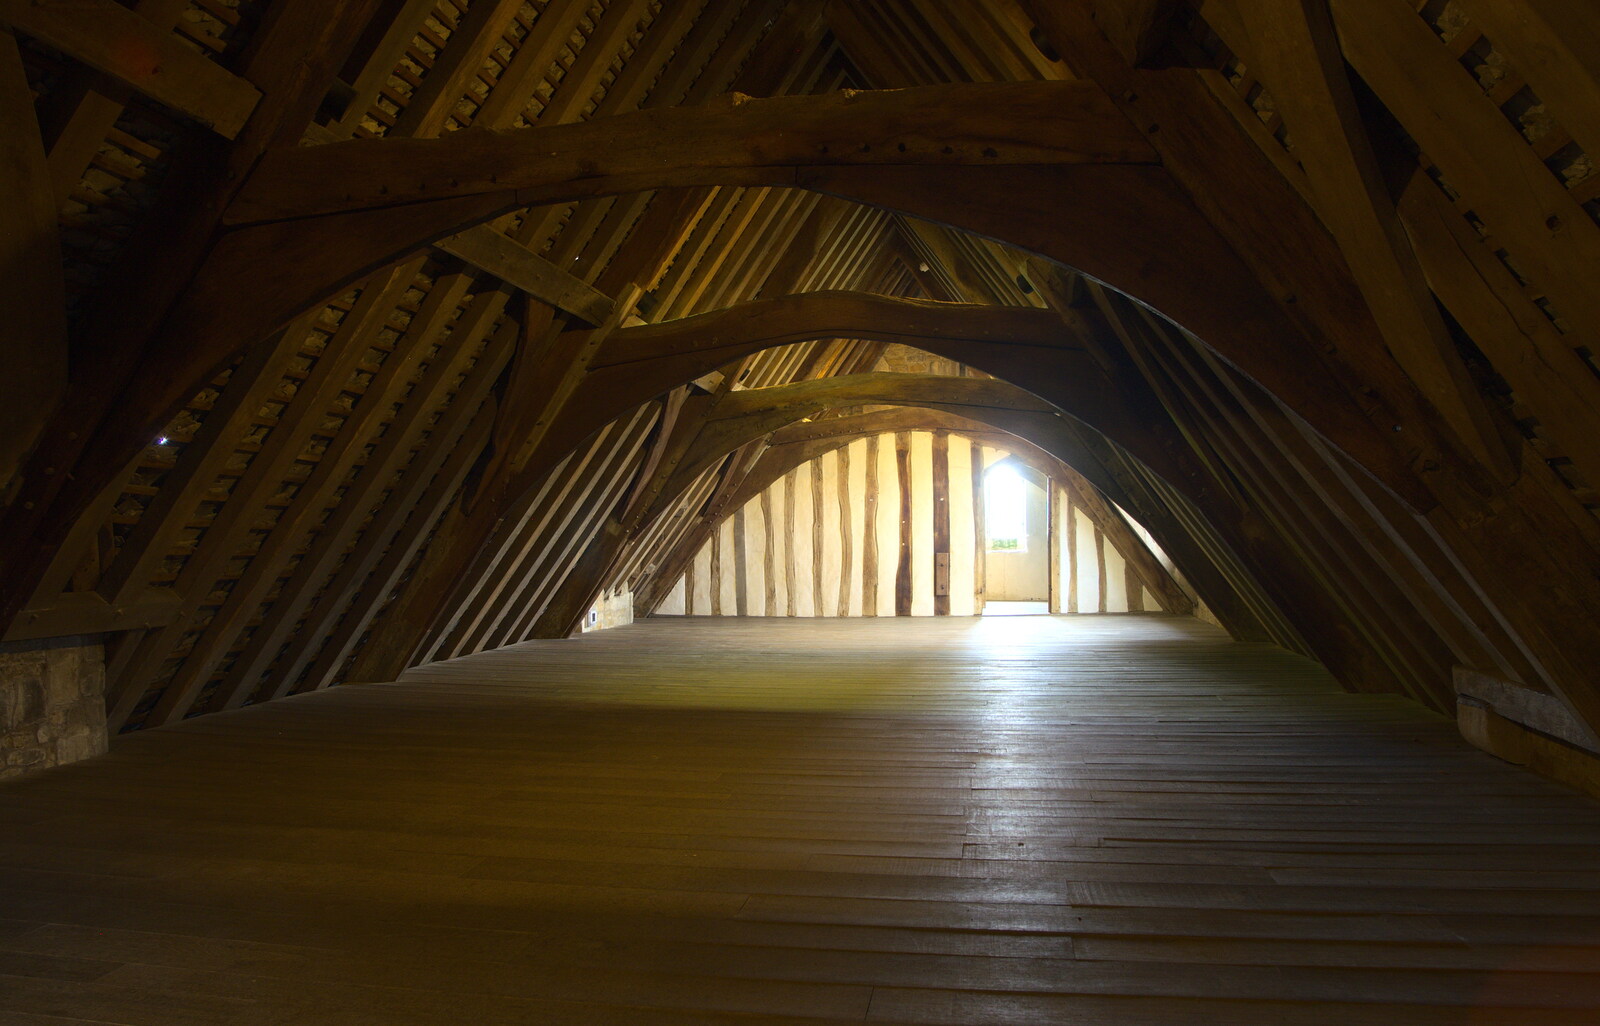 The impressive attic room from The BSCC Weekend Away, Lyddington, Rutland - 9th May 2015